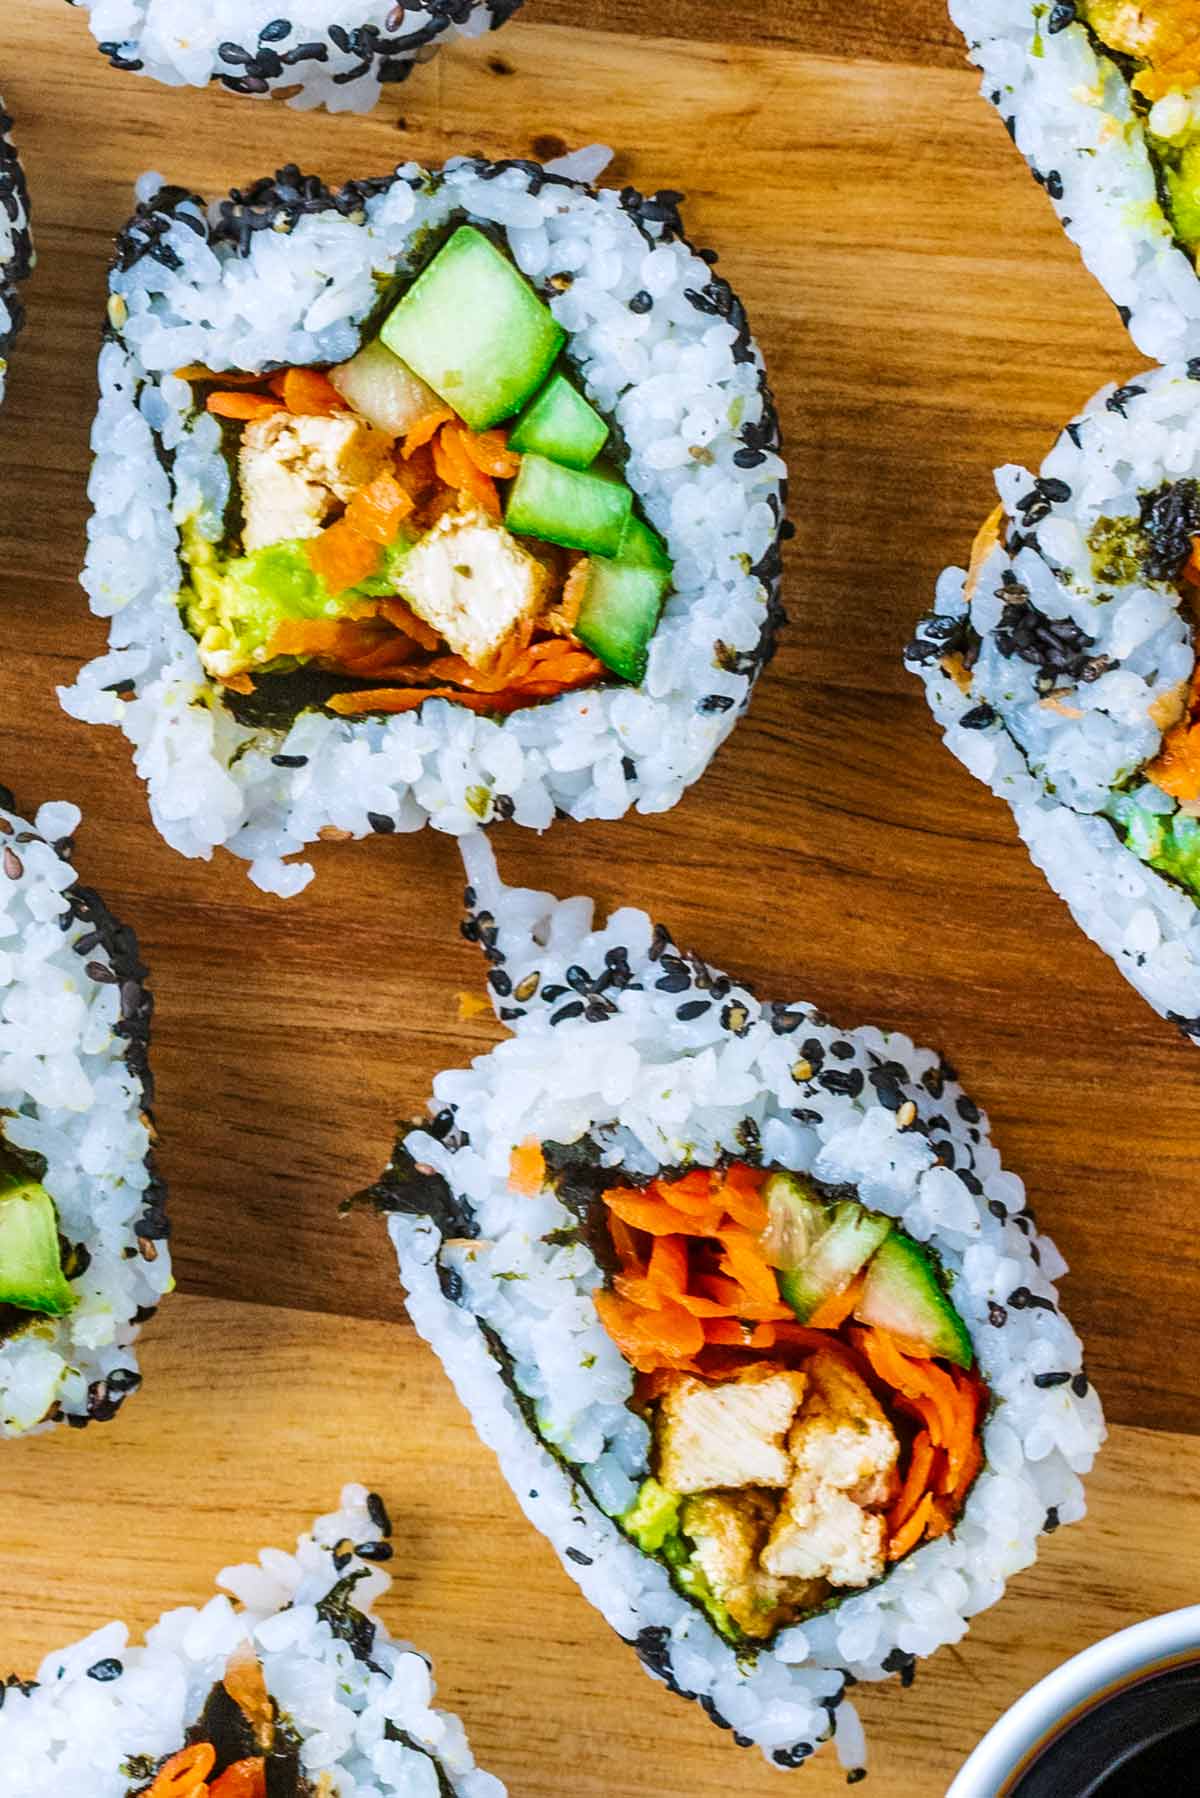 Two vegan sushi rolls on a wooden surface.